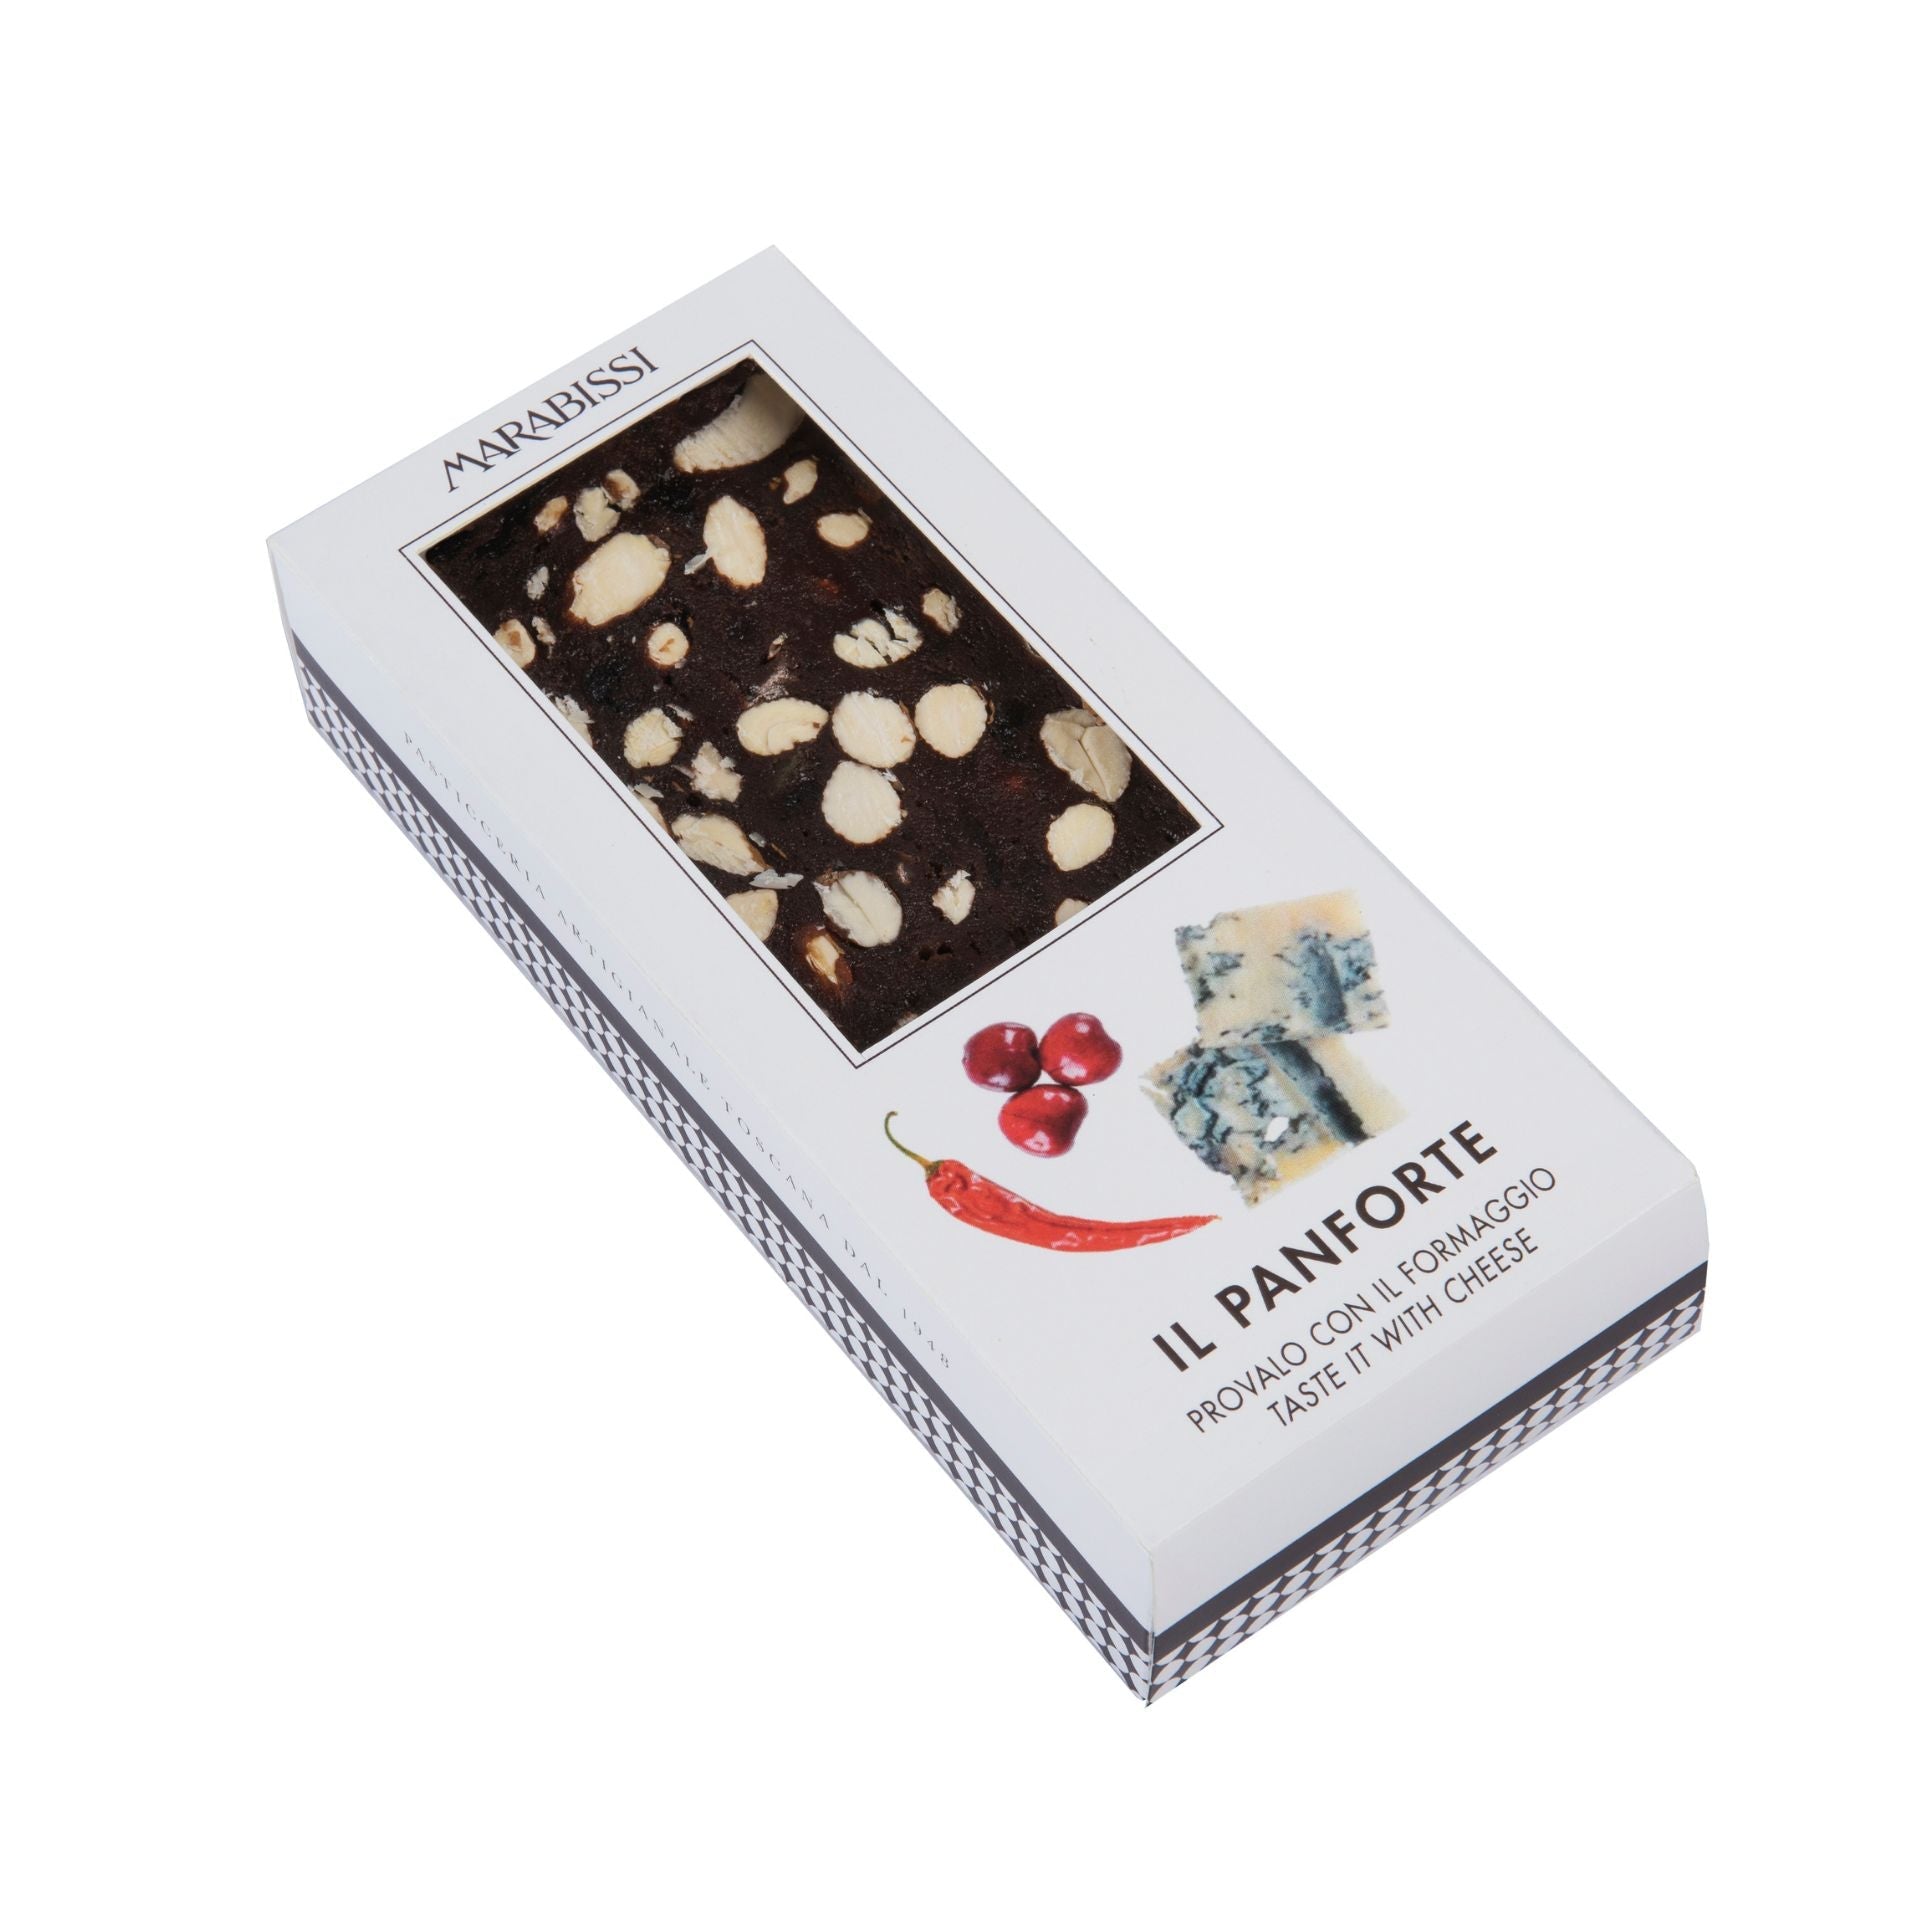 Marabissi Amarena Cherry & Chilli Panforte Cake (Box) 200g  | Imported and distributed in the UK by Just Gourmet Foods